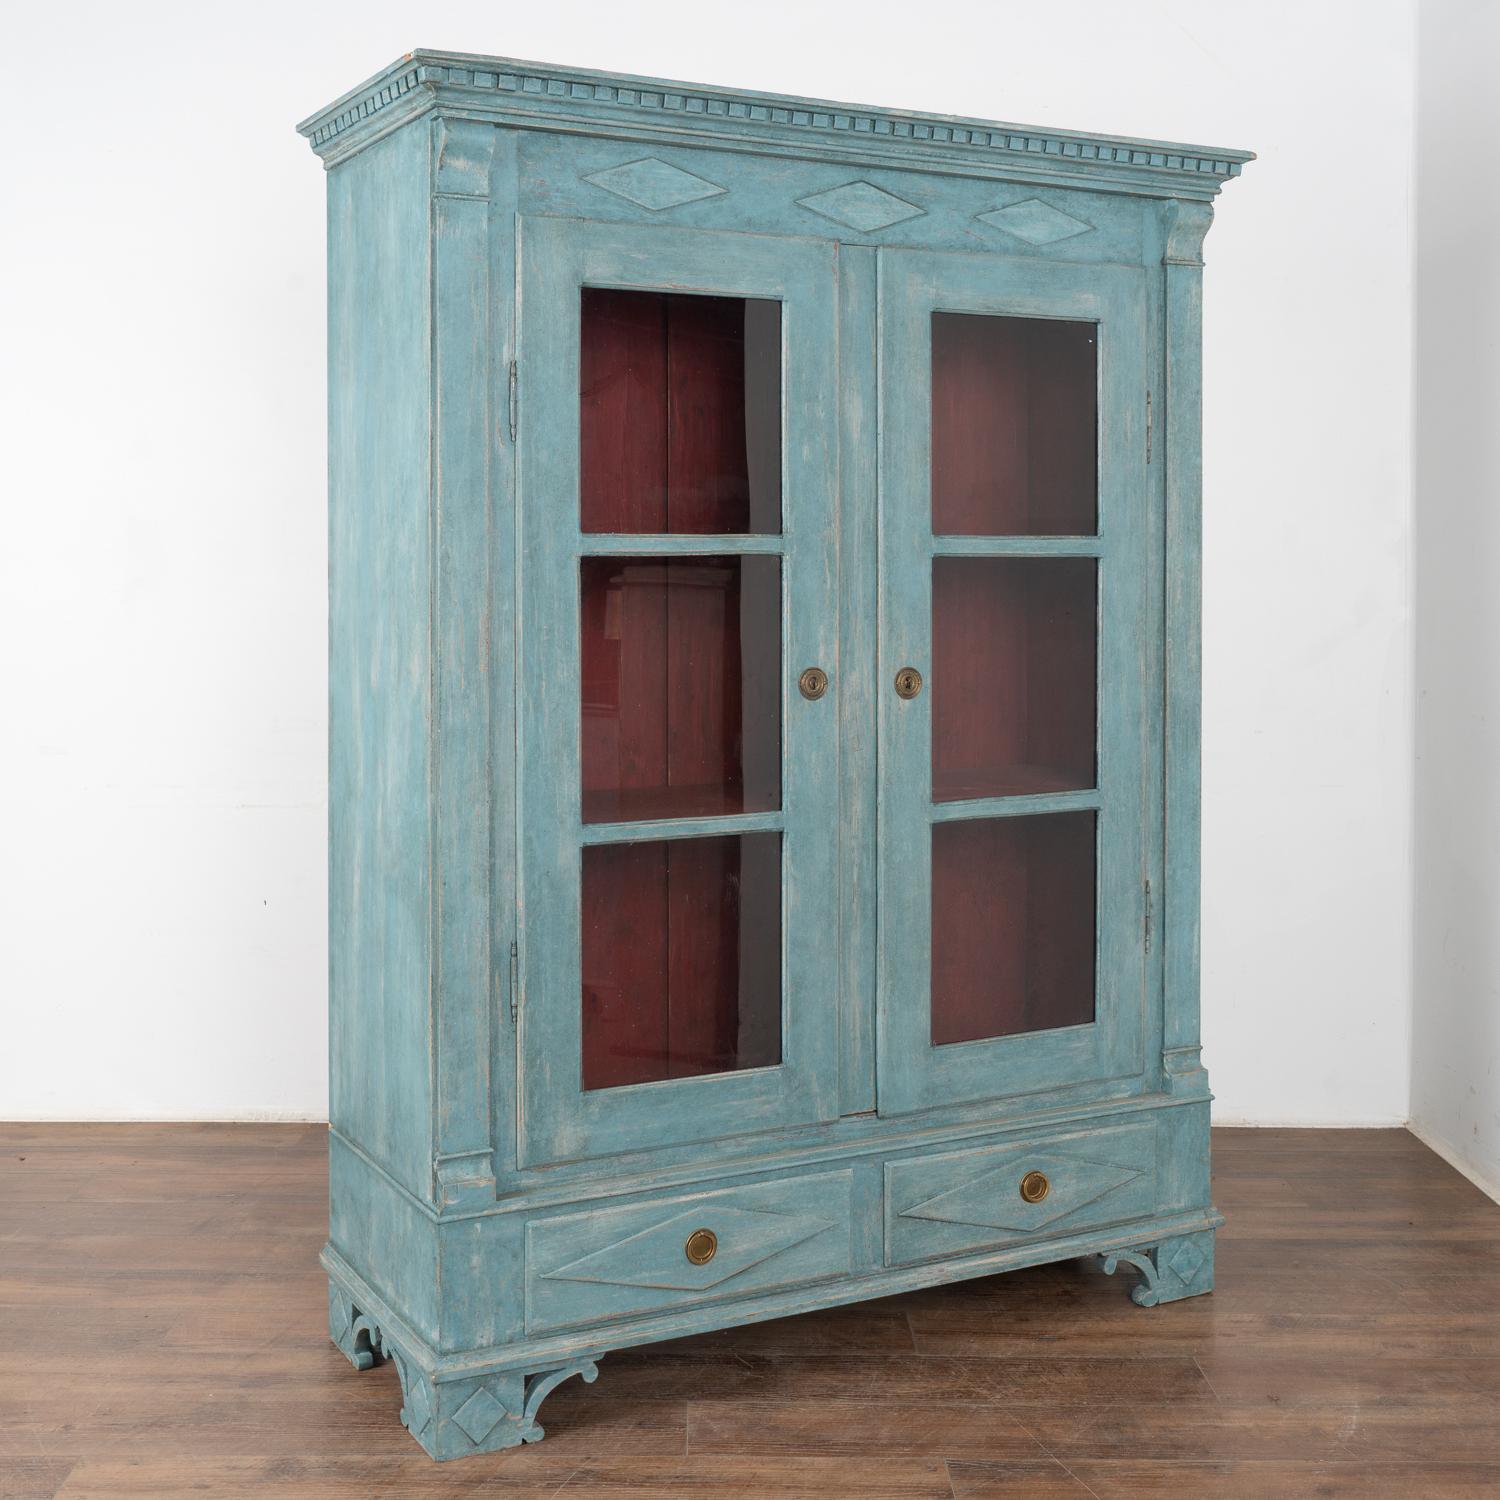 Delightful blue painted pine bookcase with dentil molding along crown and traditional diamond details throughout. 
Lower drawers and attractive feet bring balance to this display cabinet.
Restored, later professionally painted in layered shades of